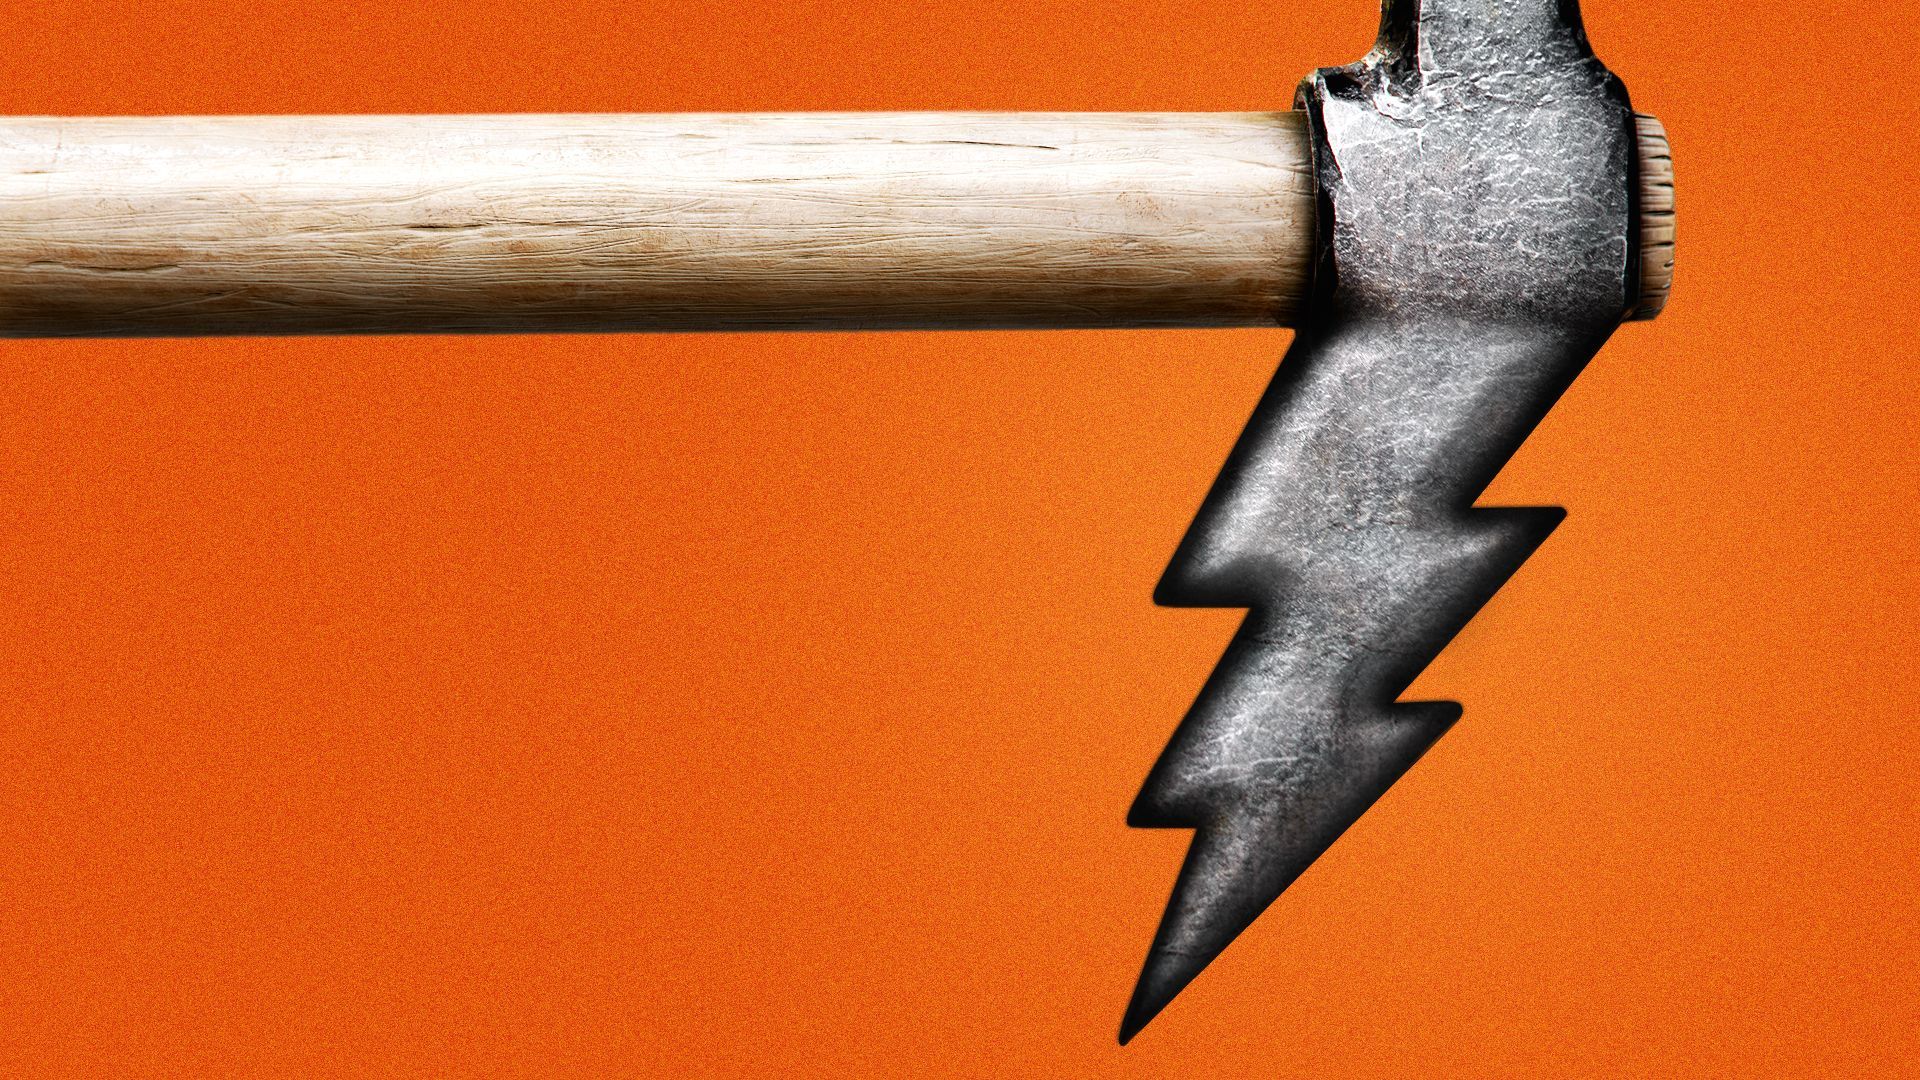 an illustration of a pick axe with one of the pick ends shaped like a lightning bolt